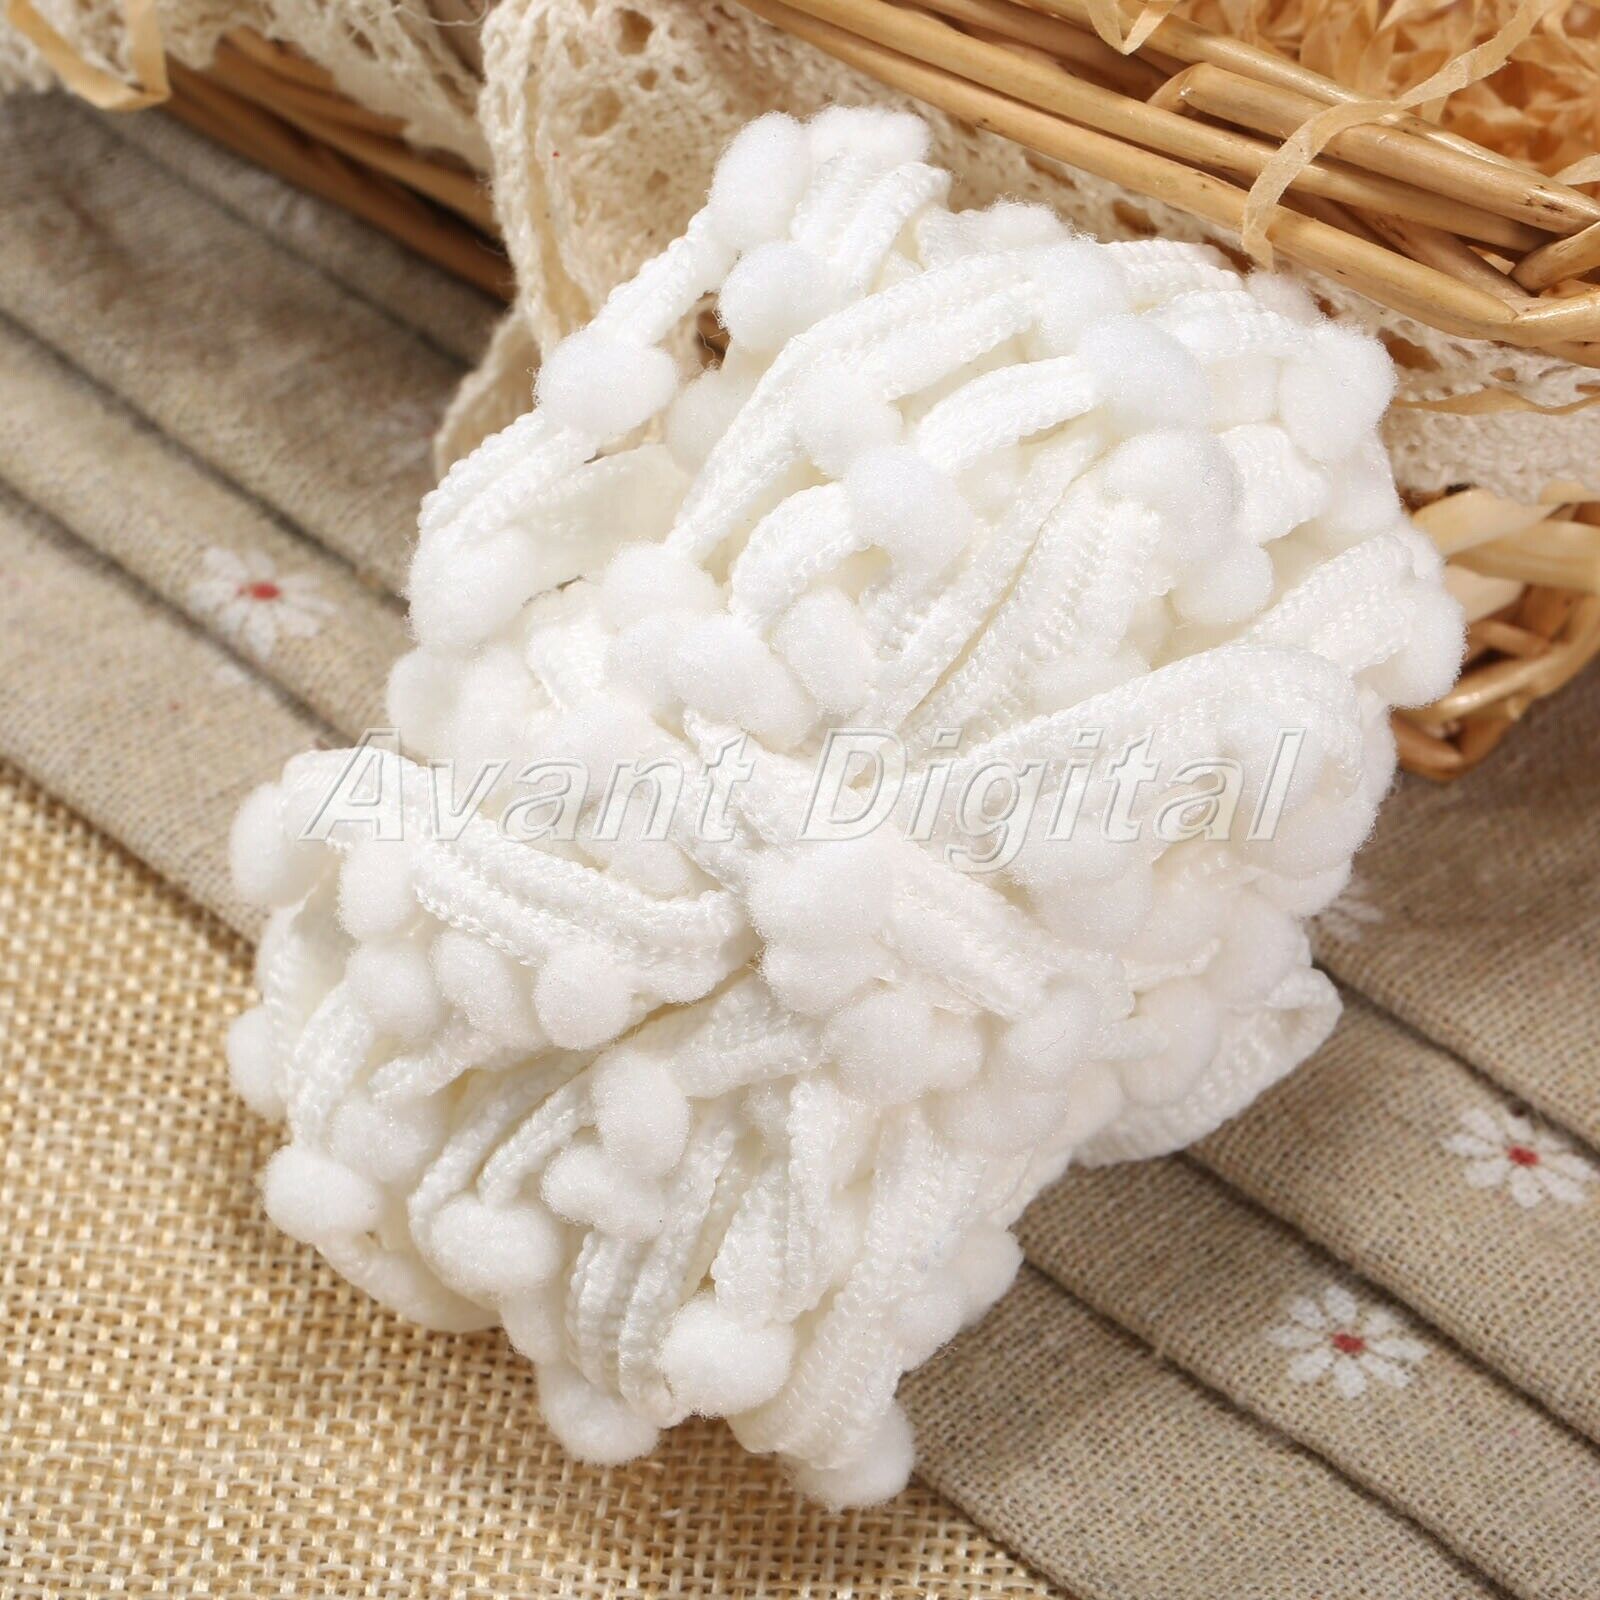 New Pom Pom mini Bobble Ball Fringe Braid Lace trimming for Crafting Sewing Hats